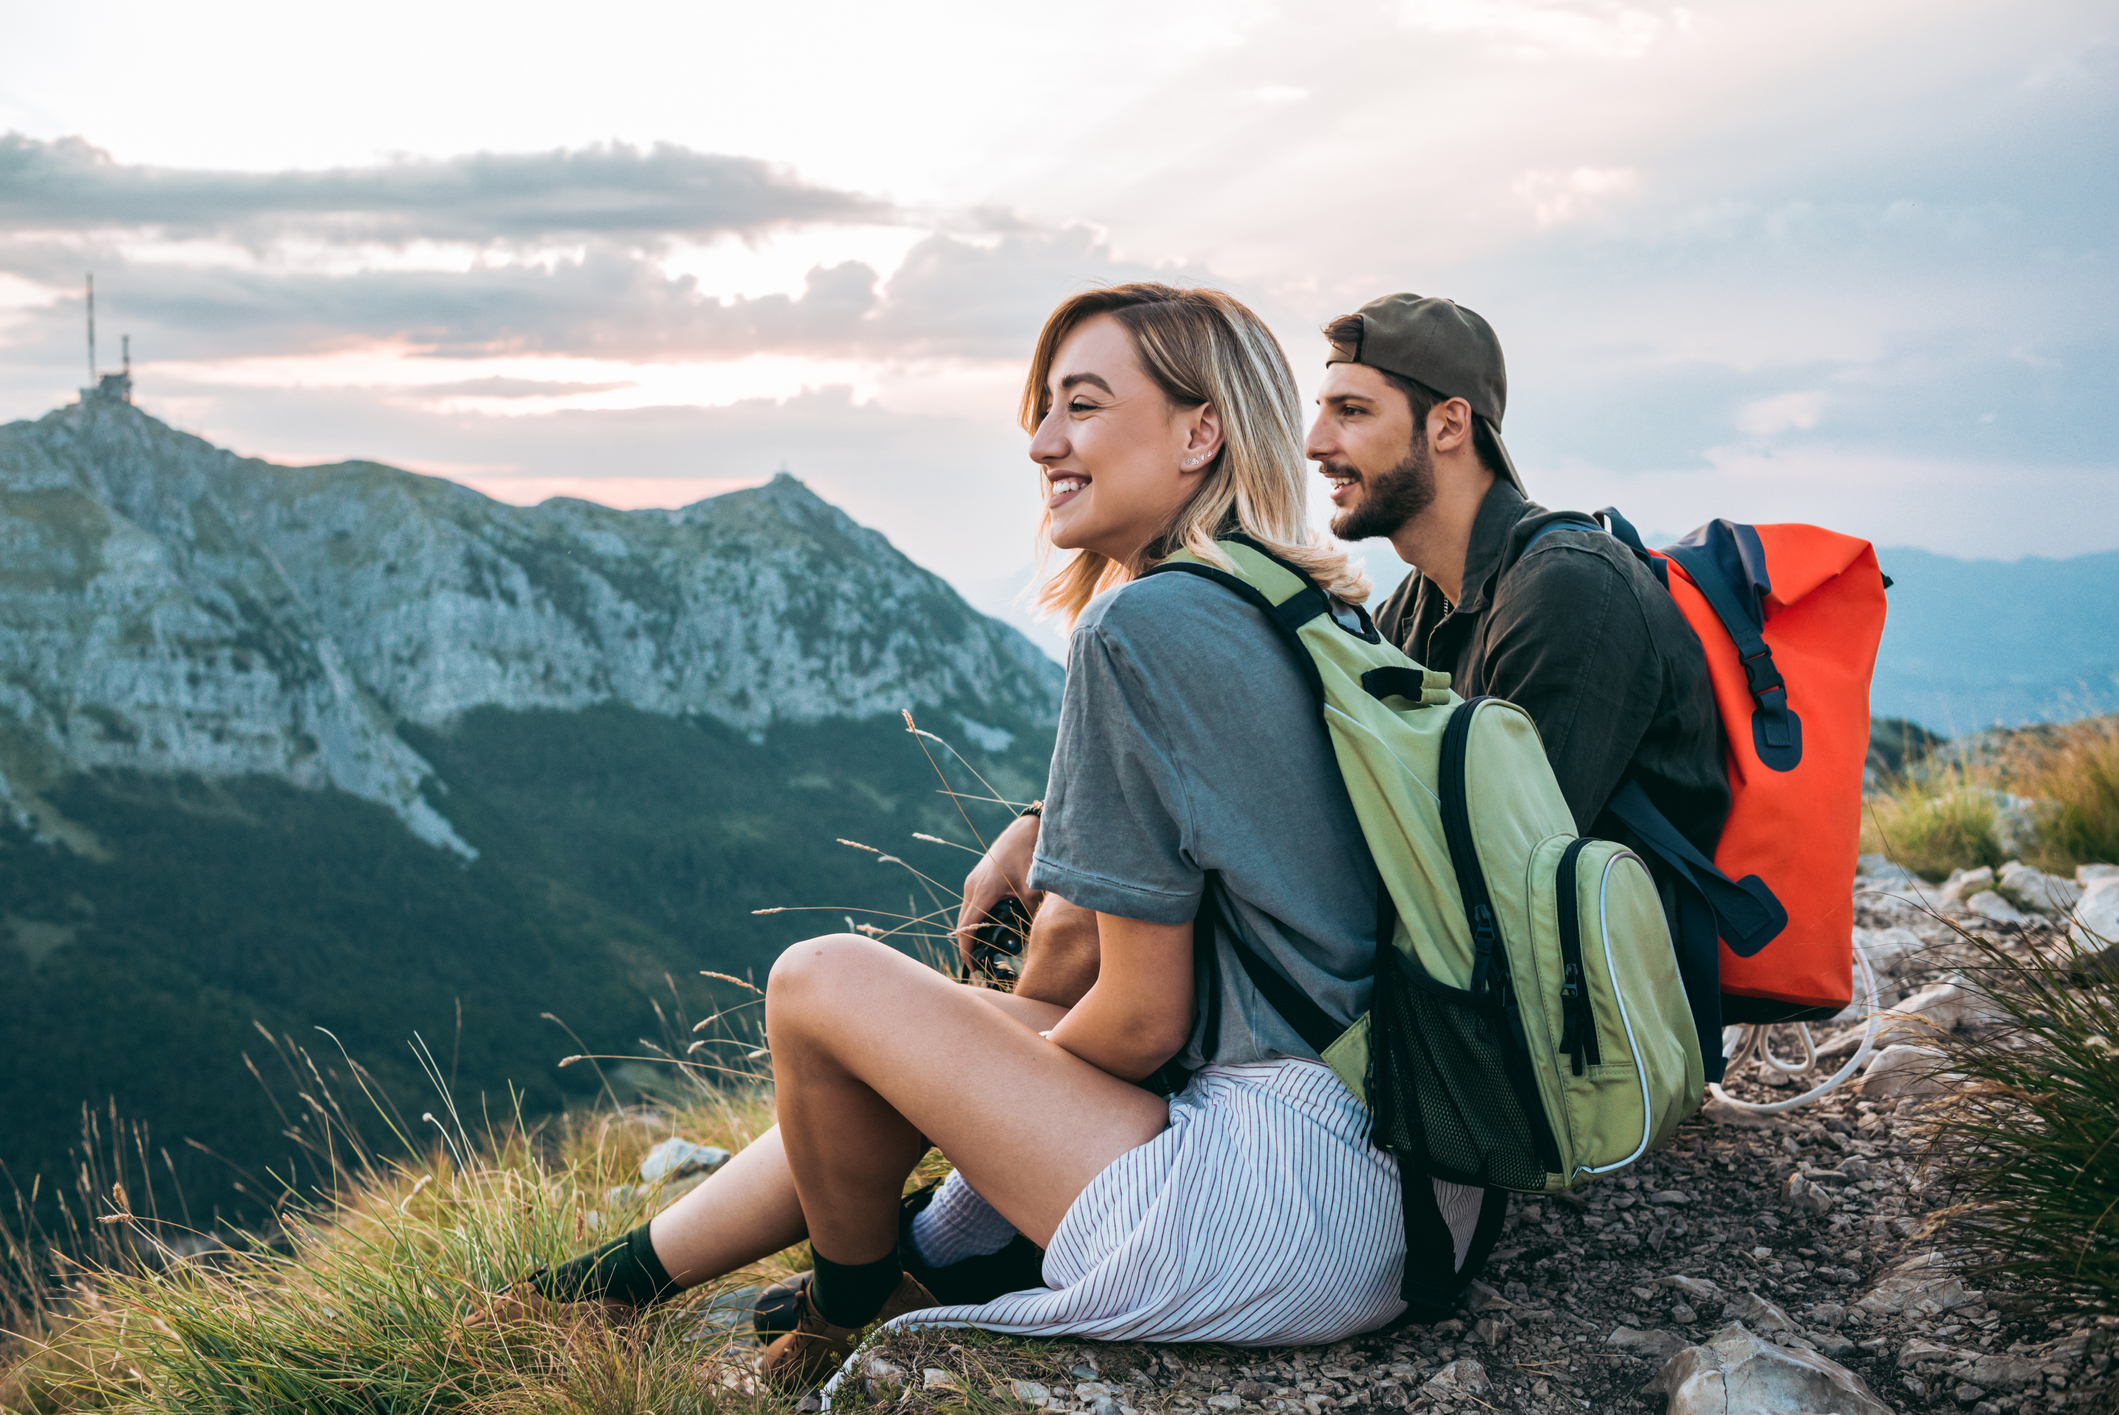 Two hikers with backpacks resting and enjoying a mountain view